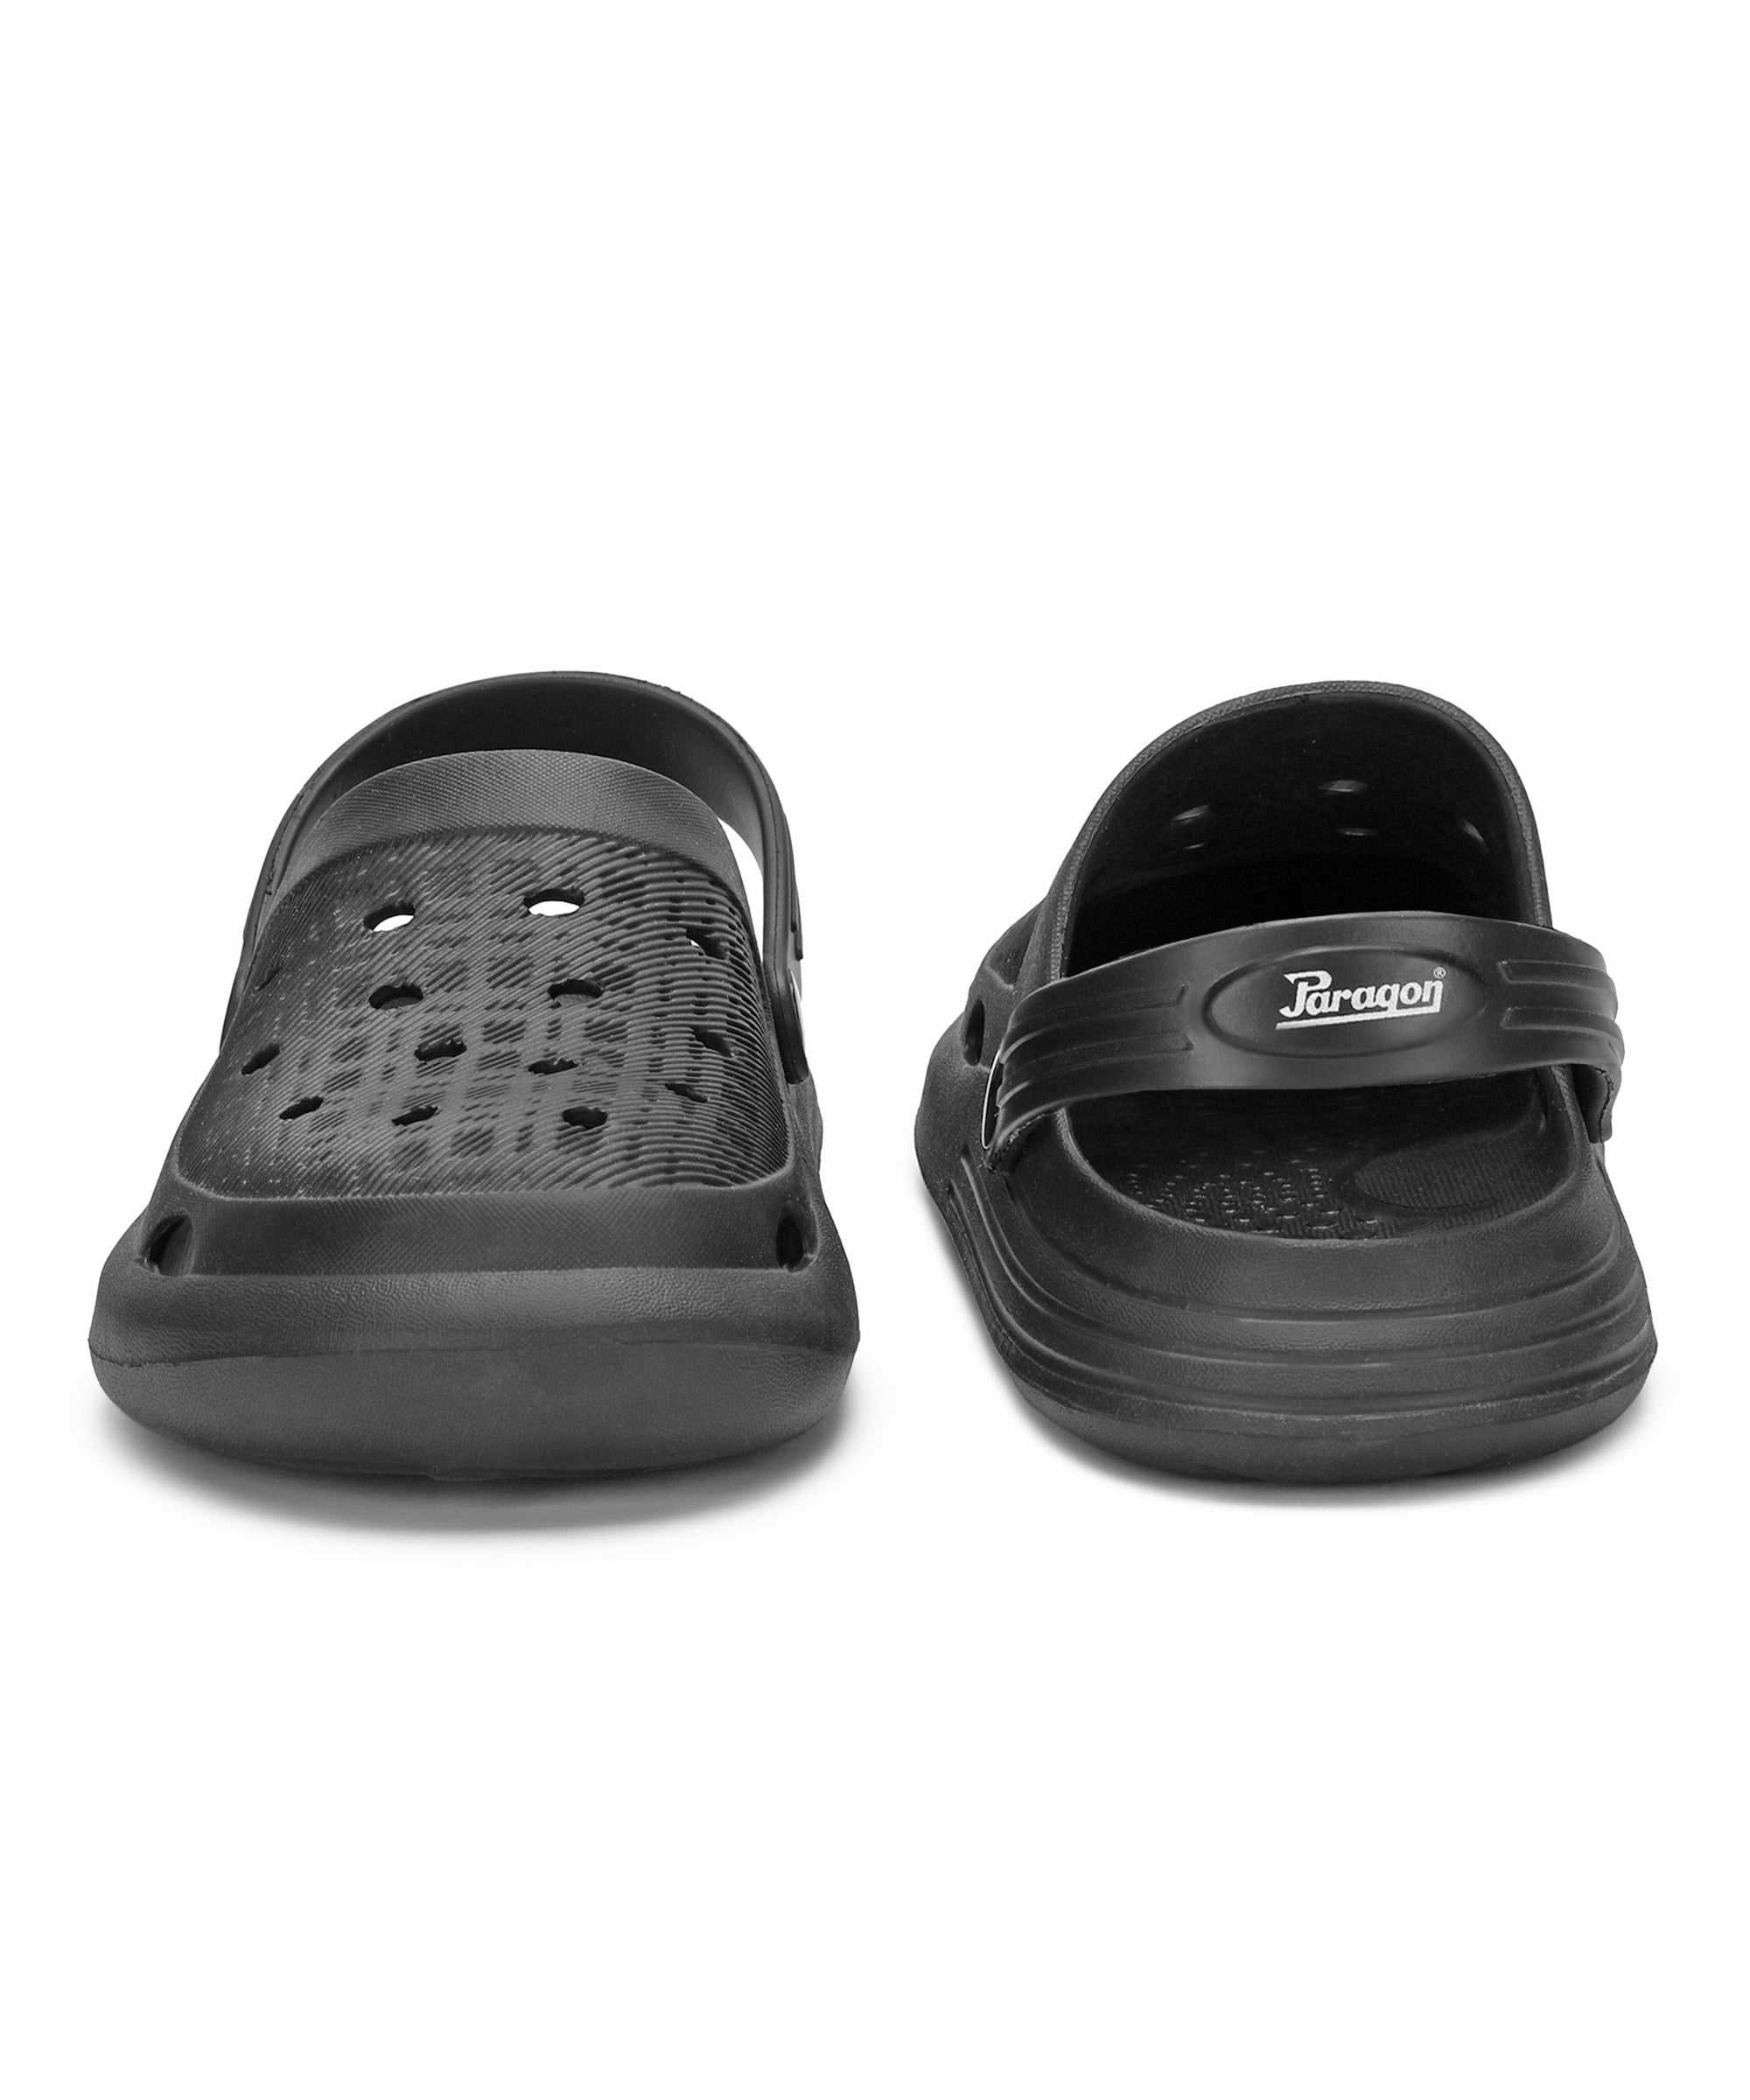 Paragon  K10914G Men Casual Clogs | Stylish, Anti-Skid, Durable | Casual &amp; Comfortable | For Everyday Use